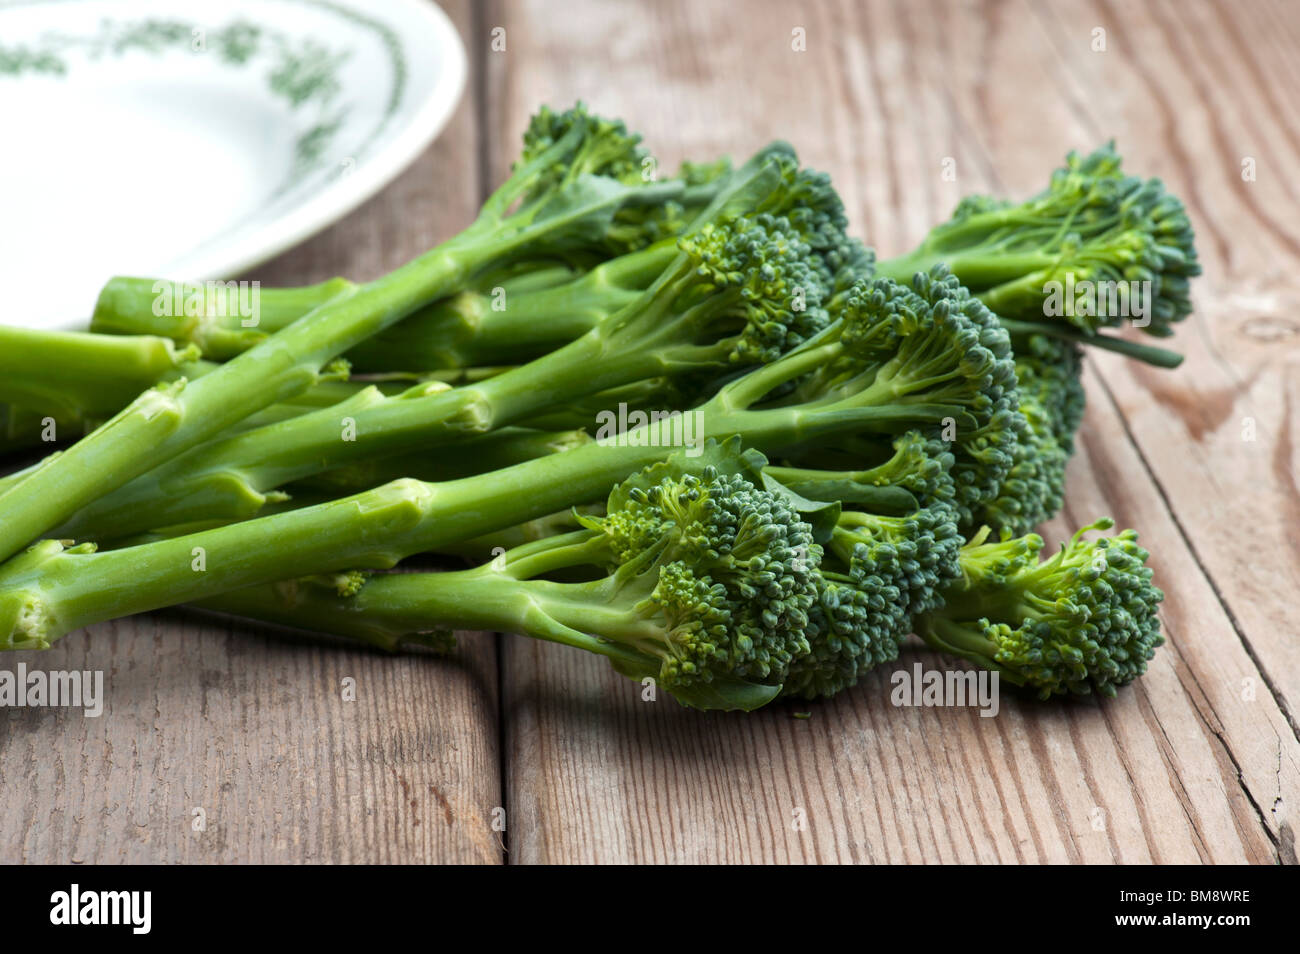 Fresh Tenderstem Broccoli Laid On A Wooden Kitchen Table Stock Photo